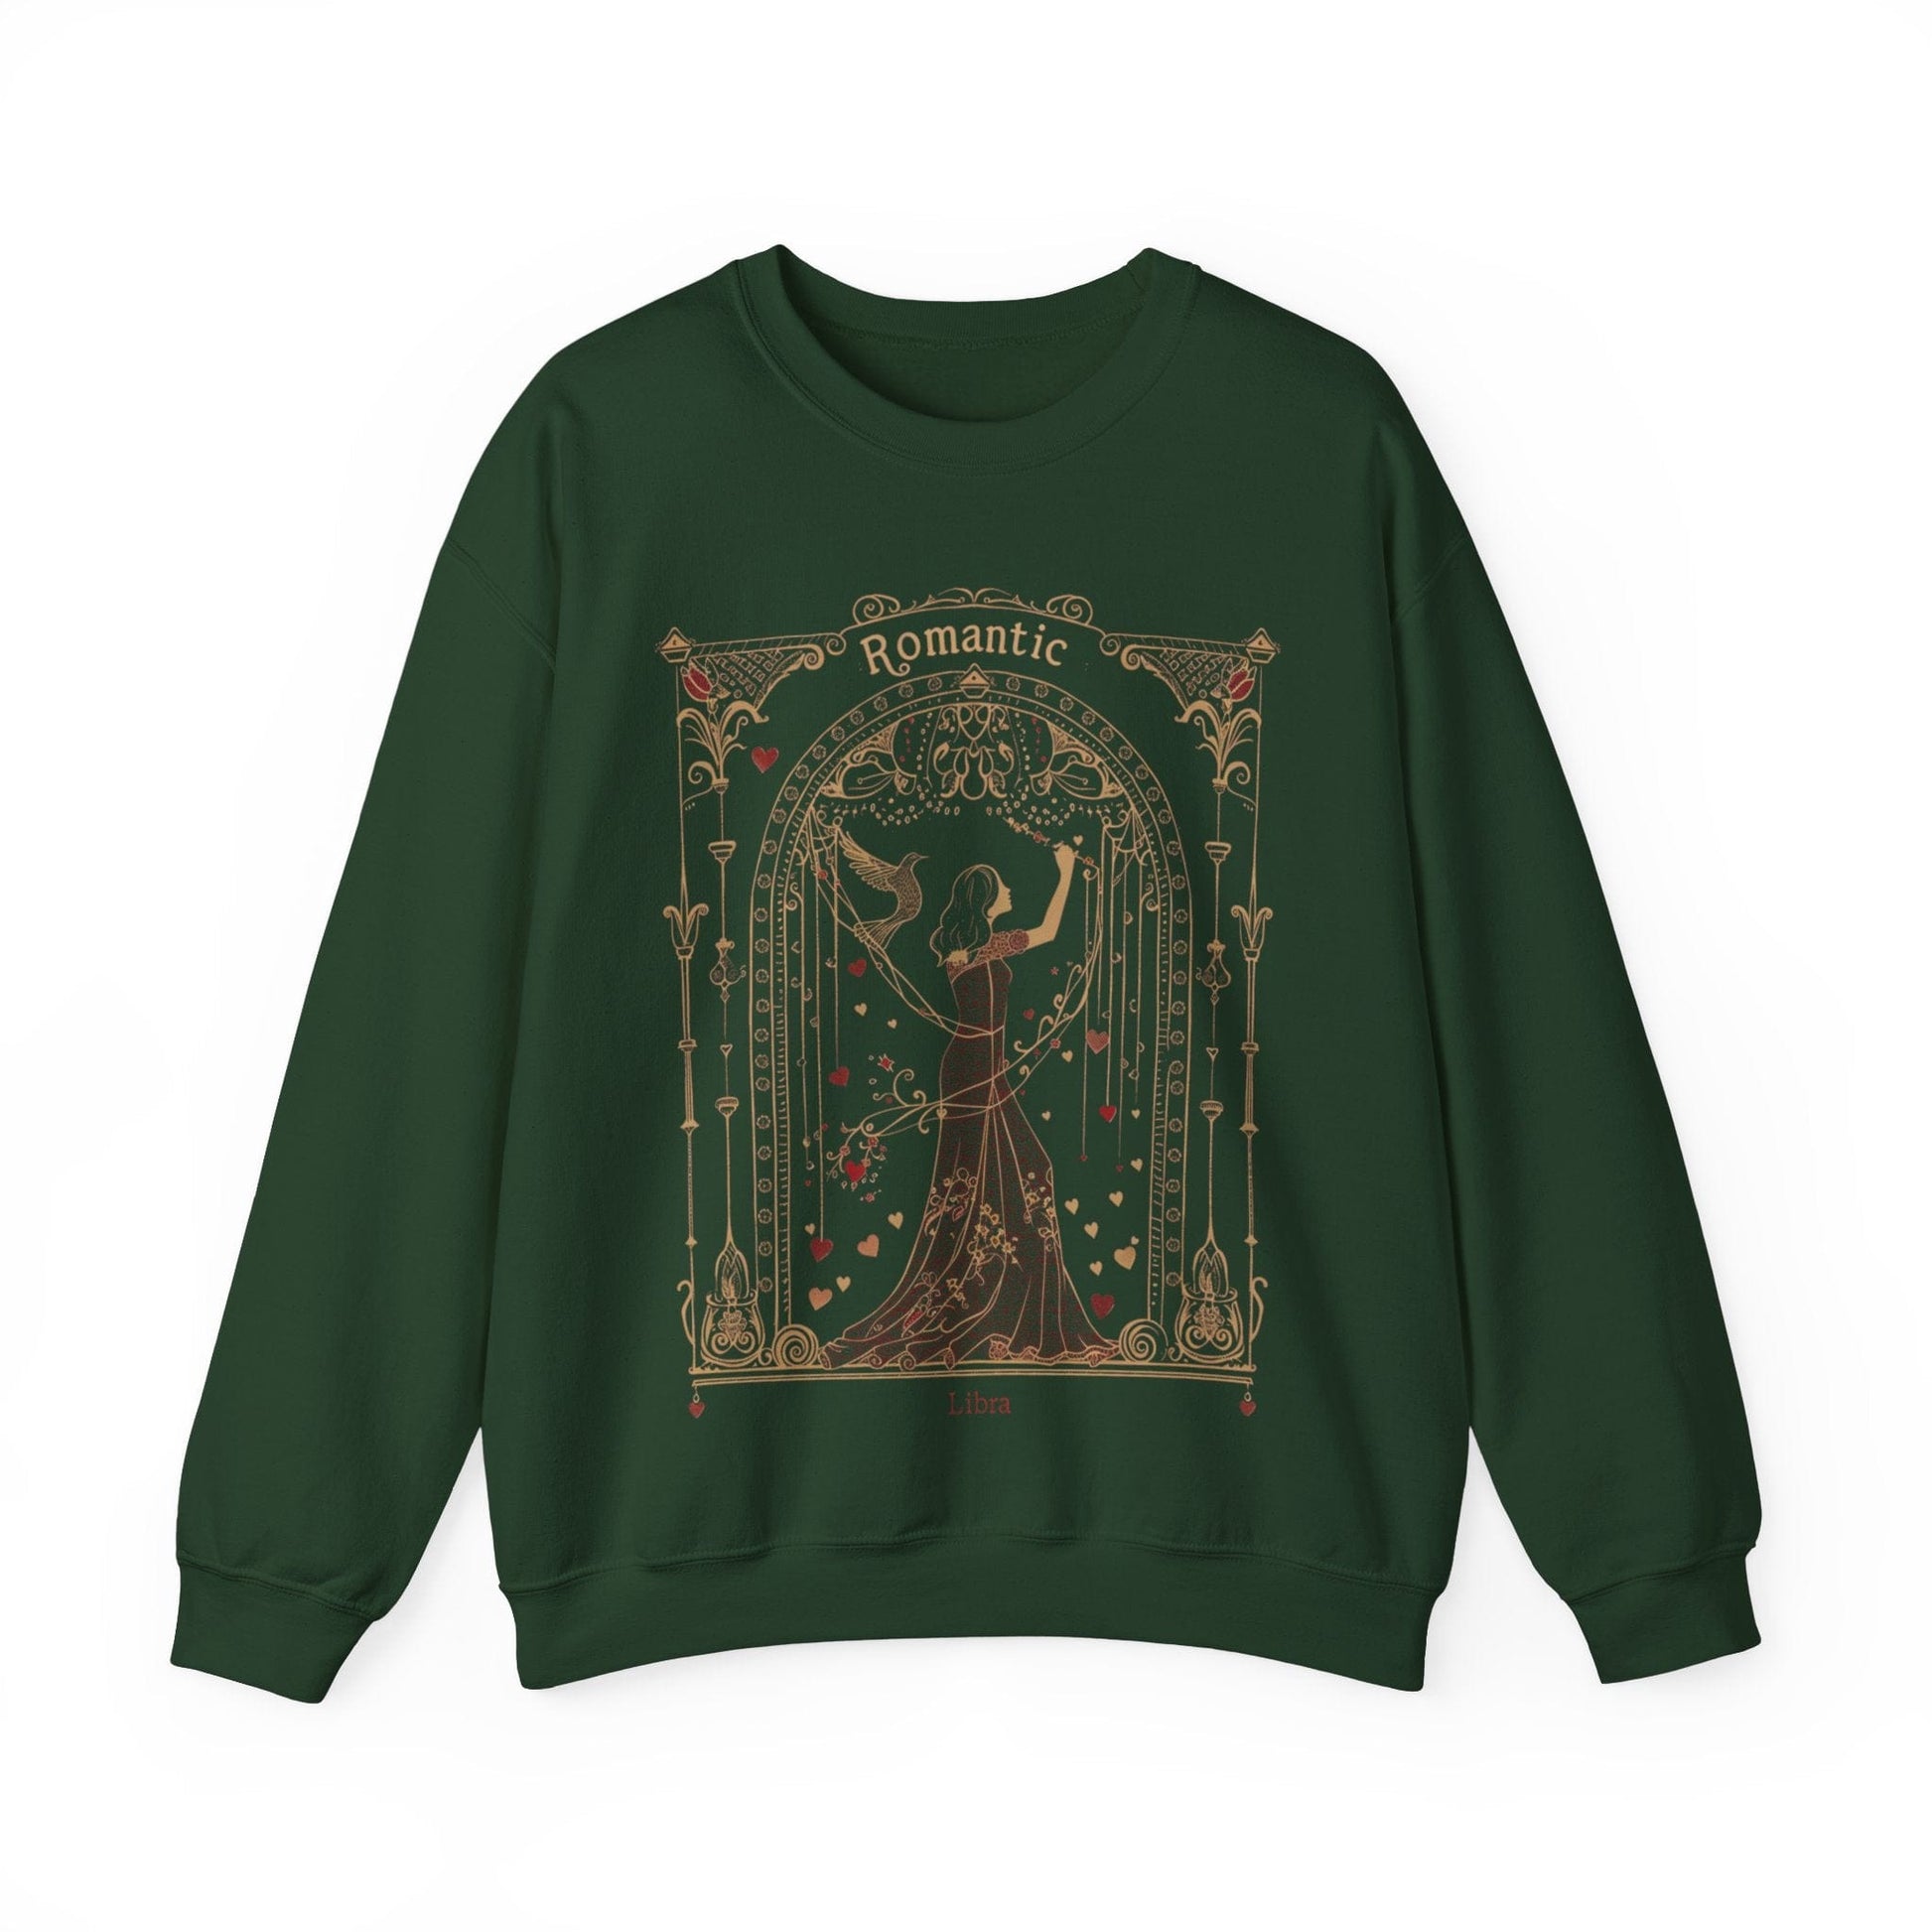 Sweatshirt S / Forest Green "Scales of Affection" Libra Romantic Sweater: Enchant in Comfort